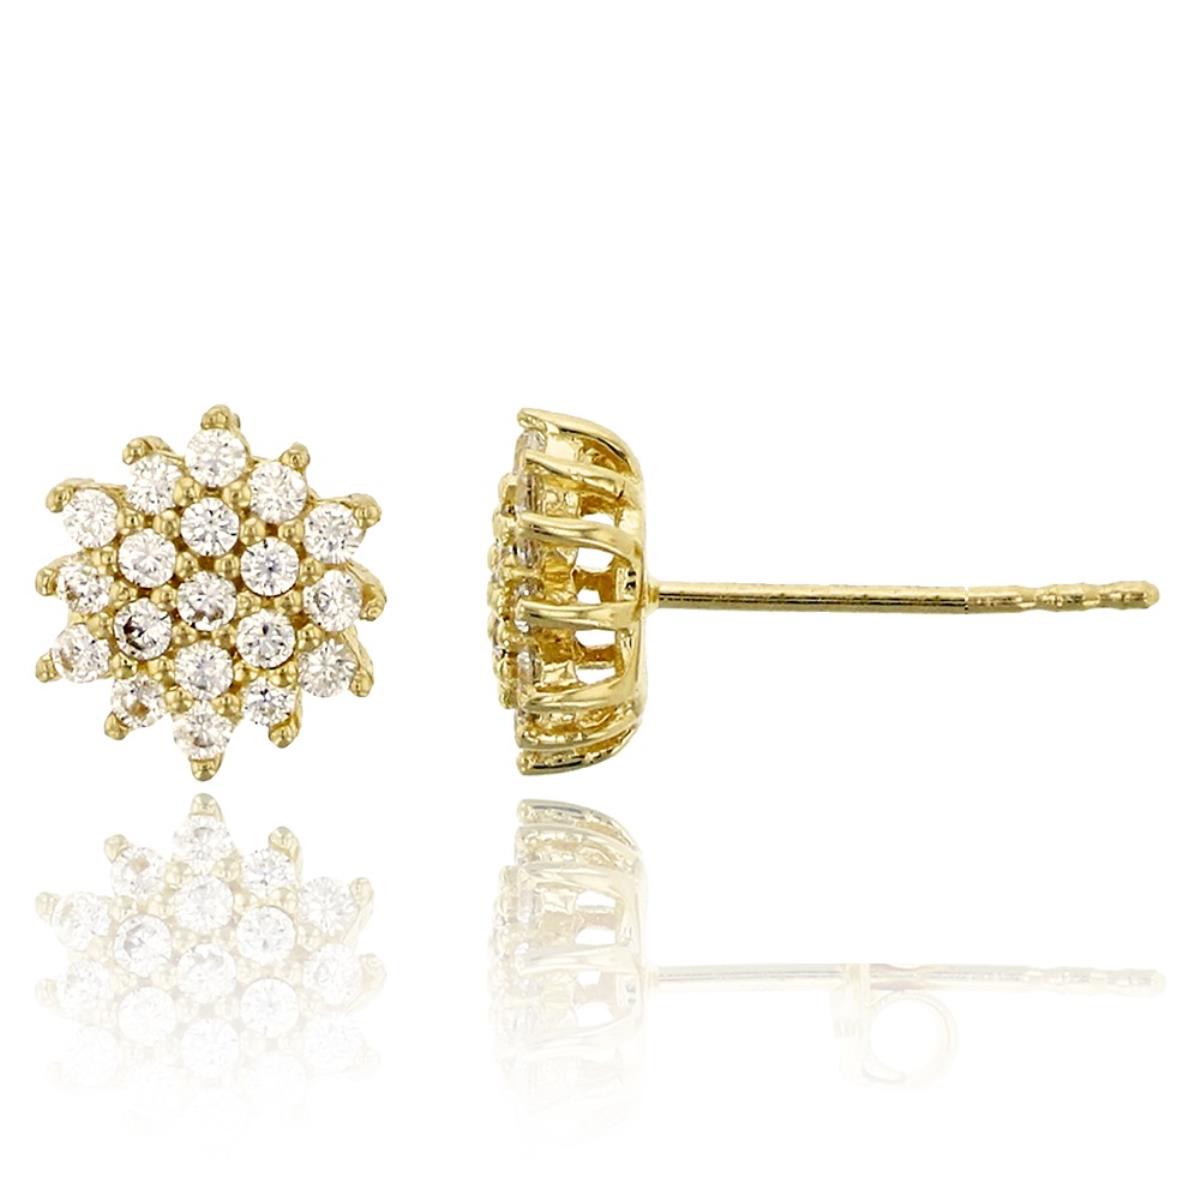 14K Yellow Gold Micropave Flower Stud Earring